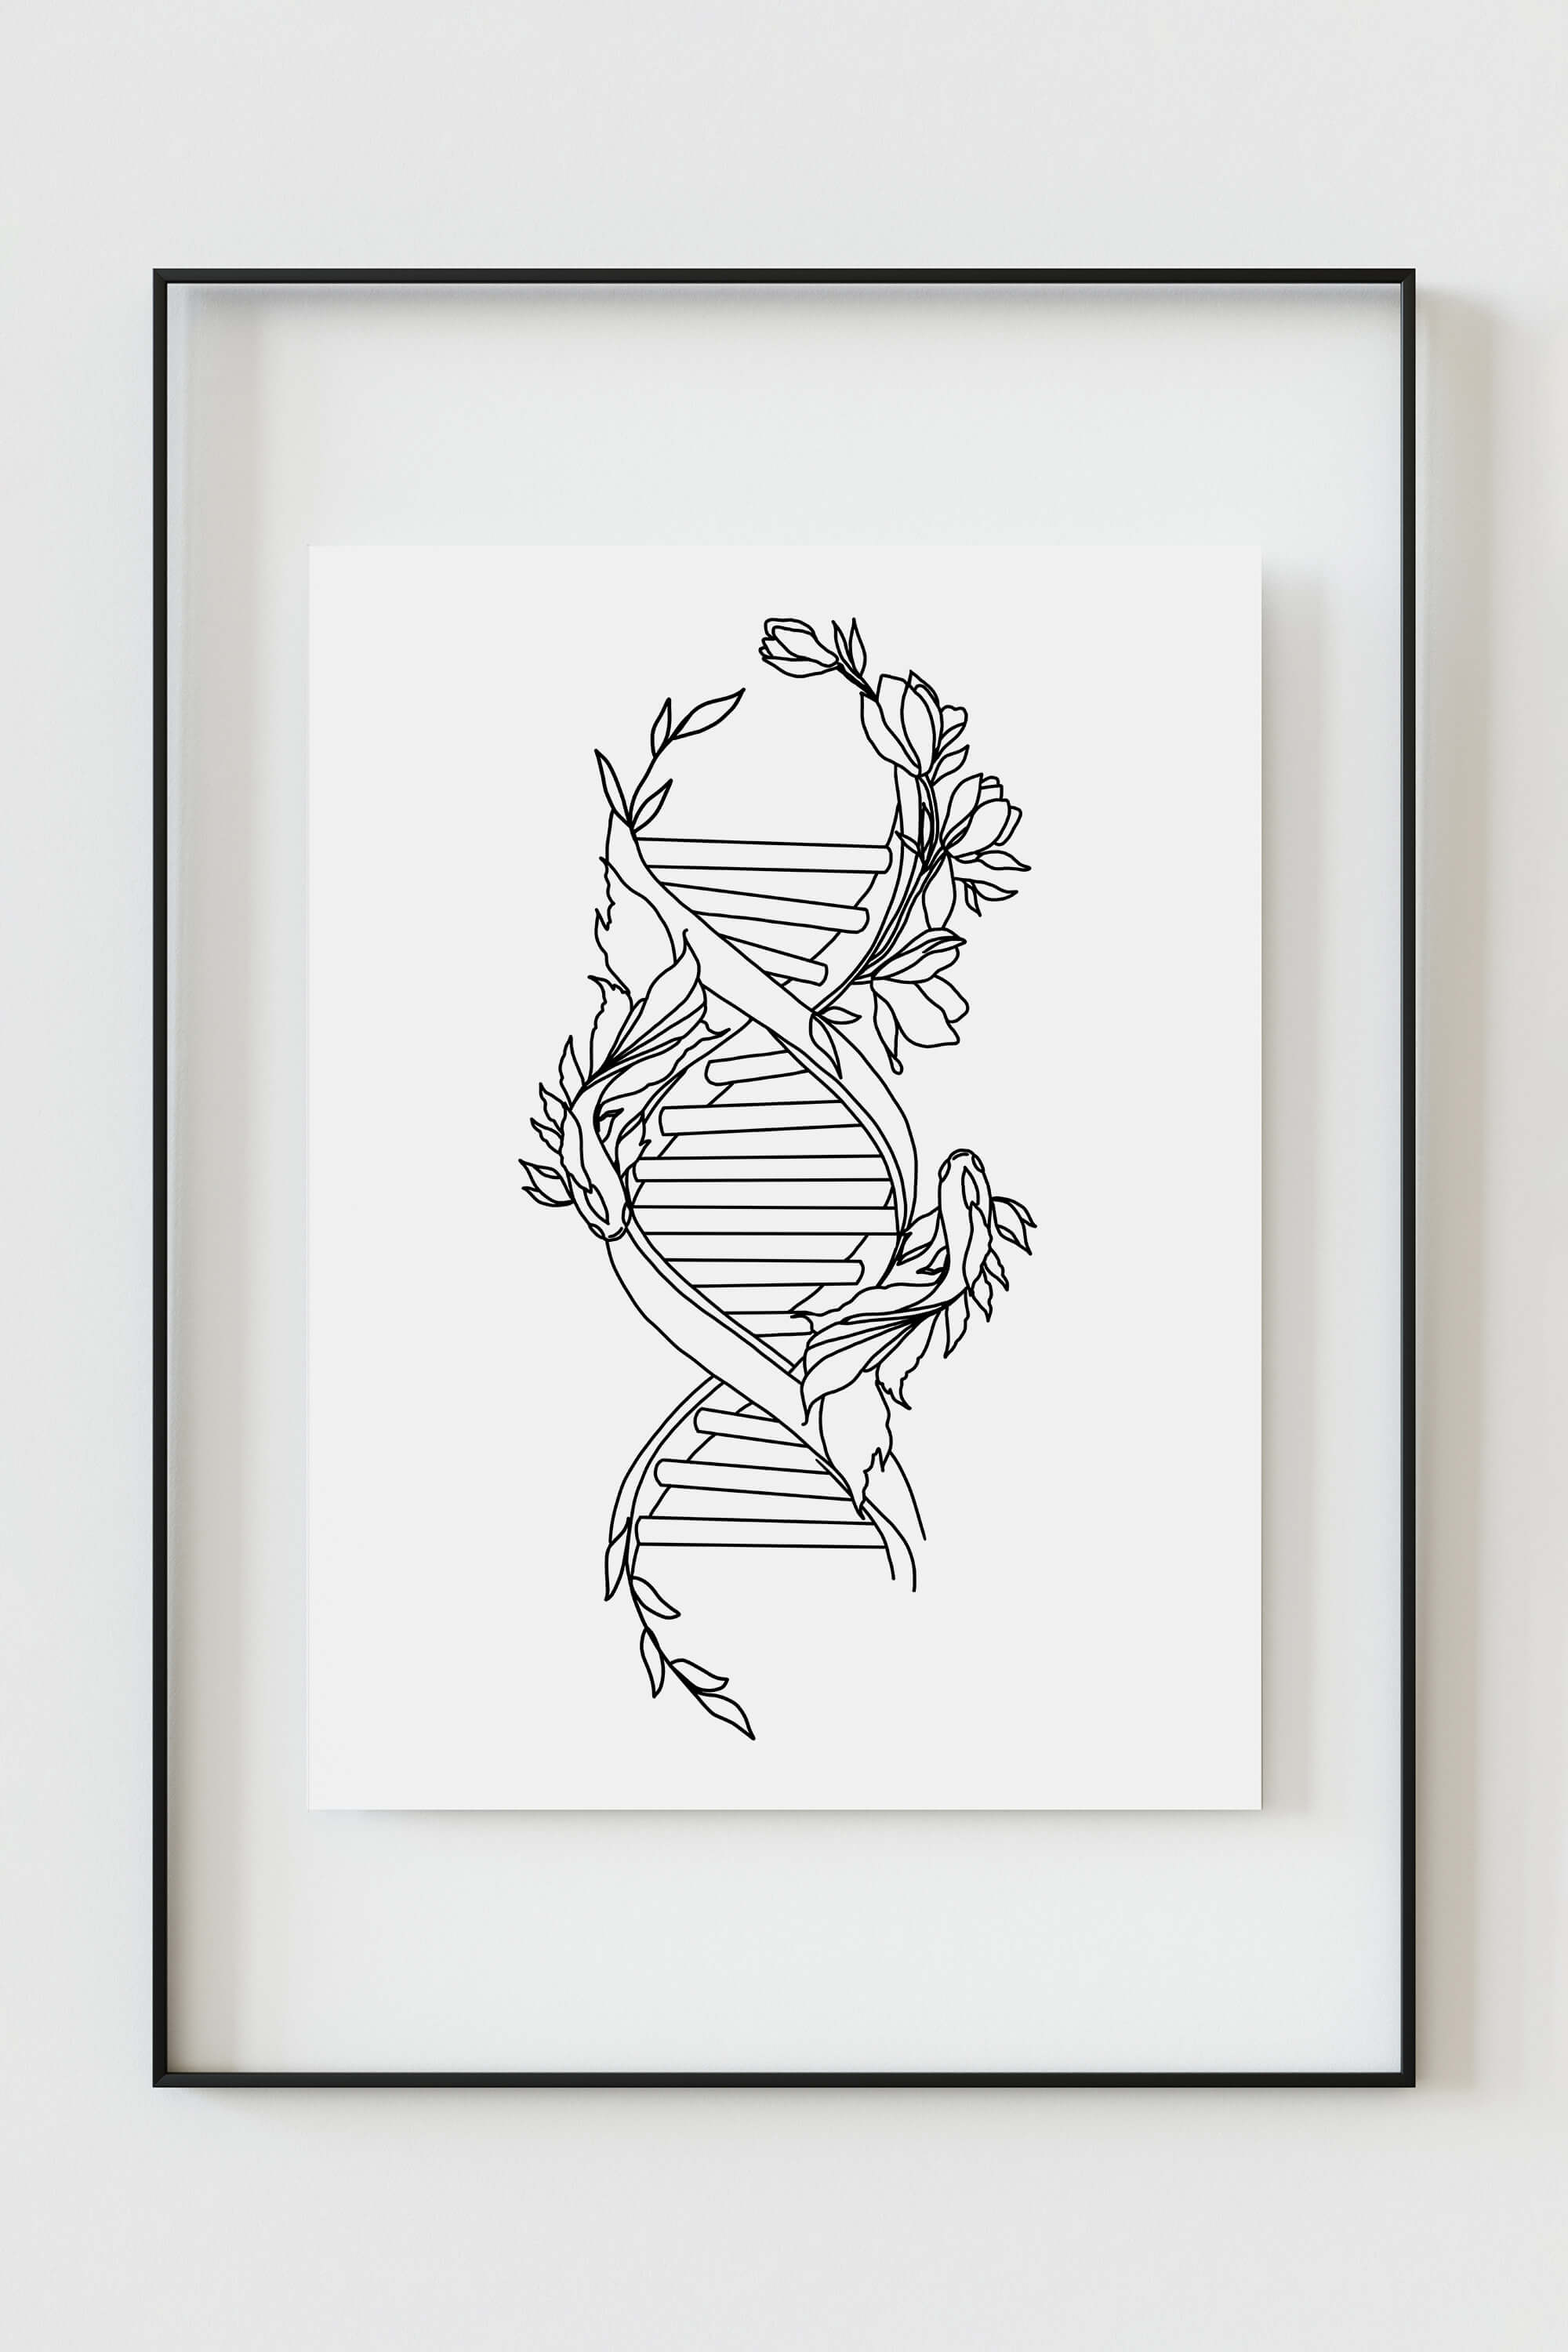 Sophisticated black-and-white art print elevating your science room with timeless elegance.